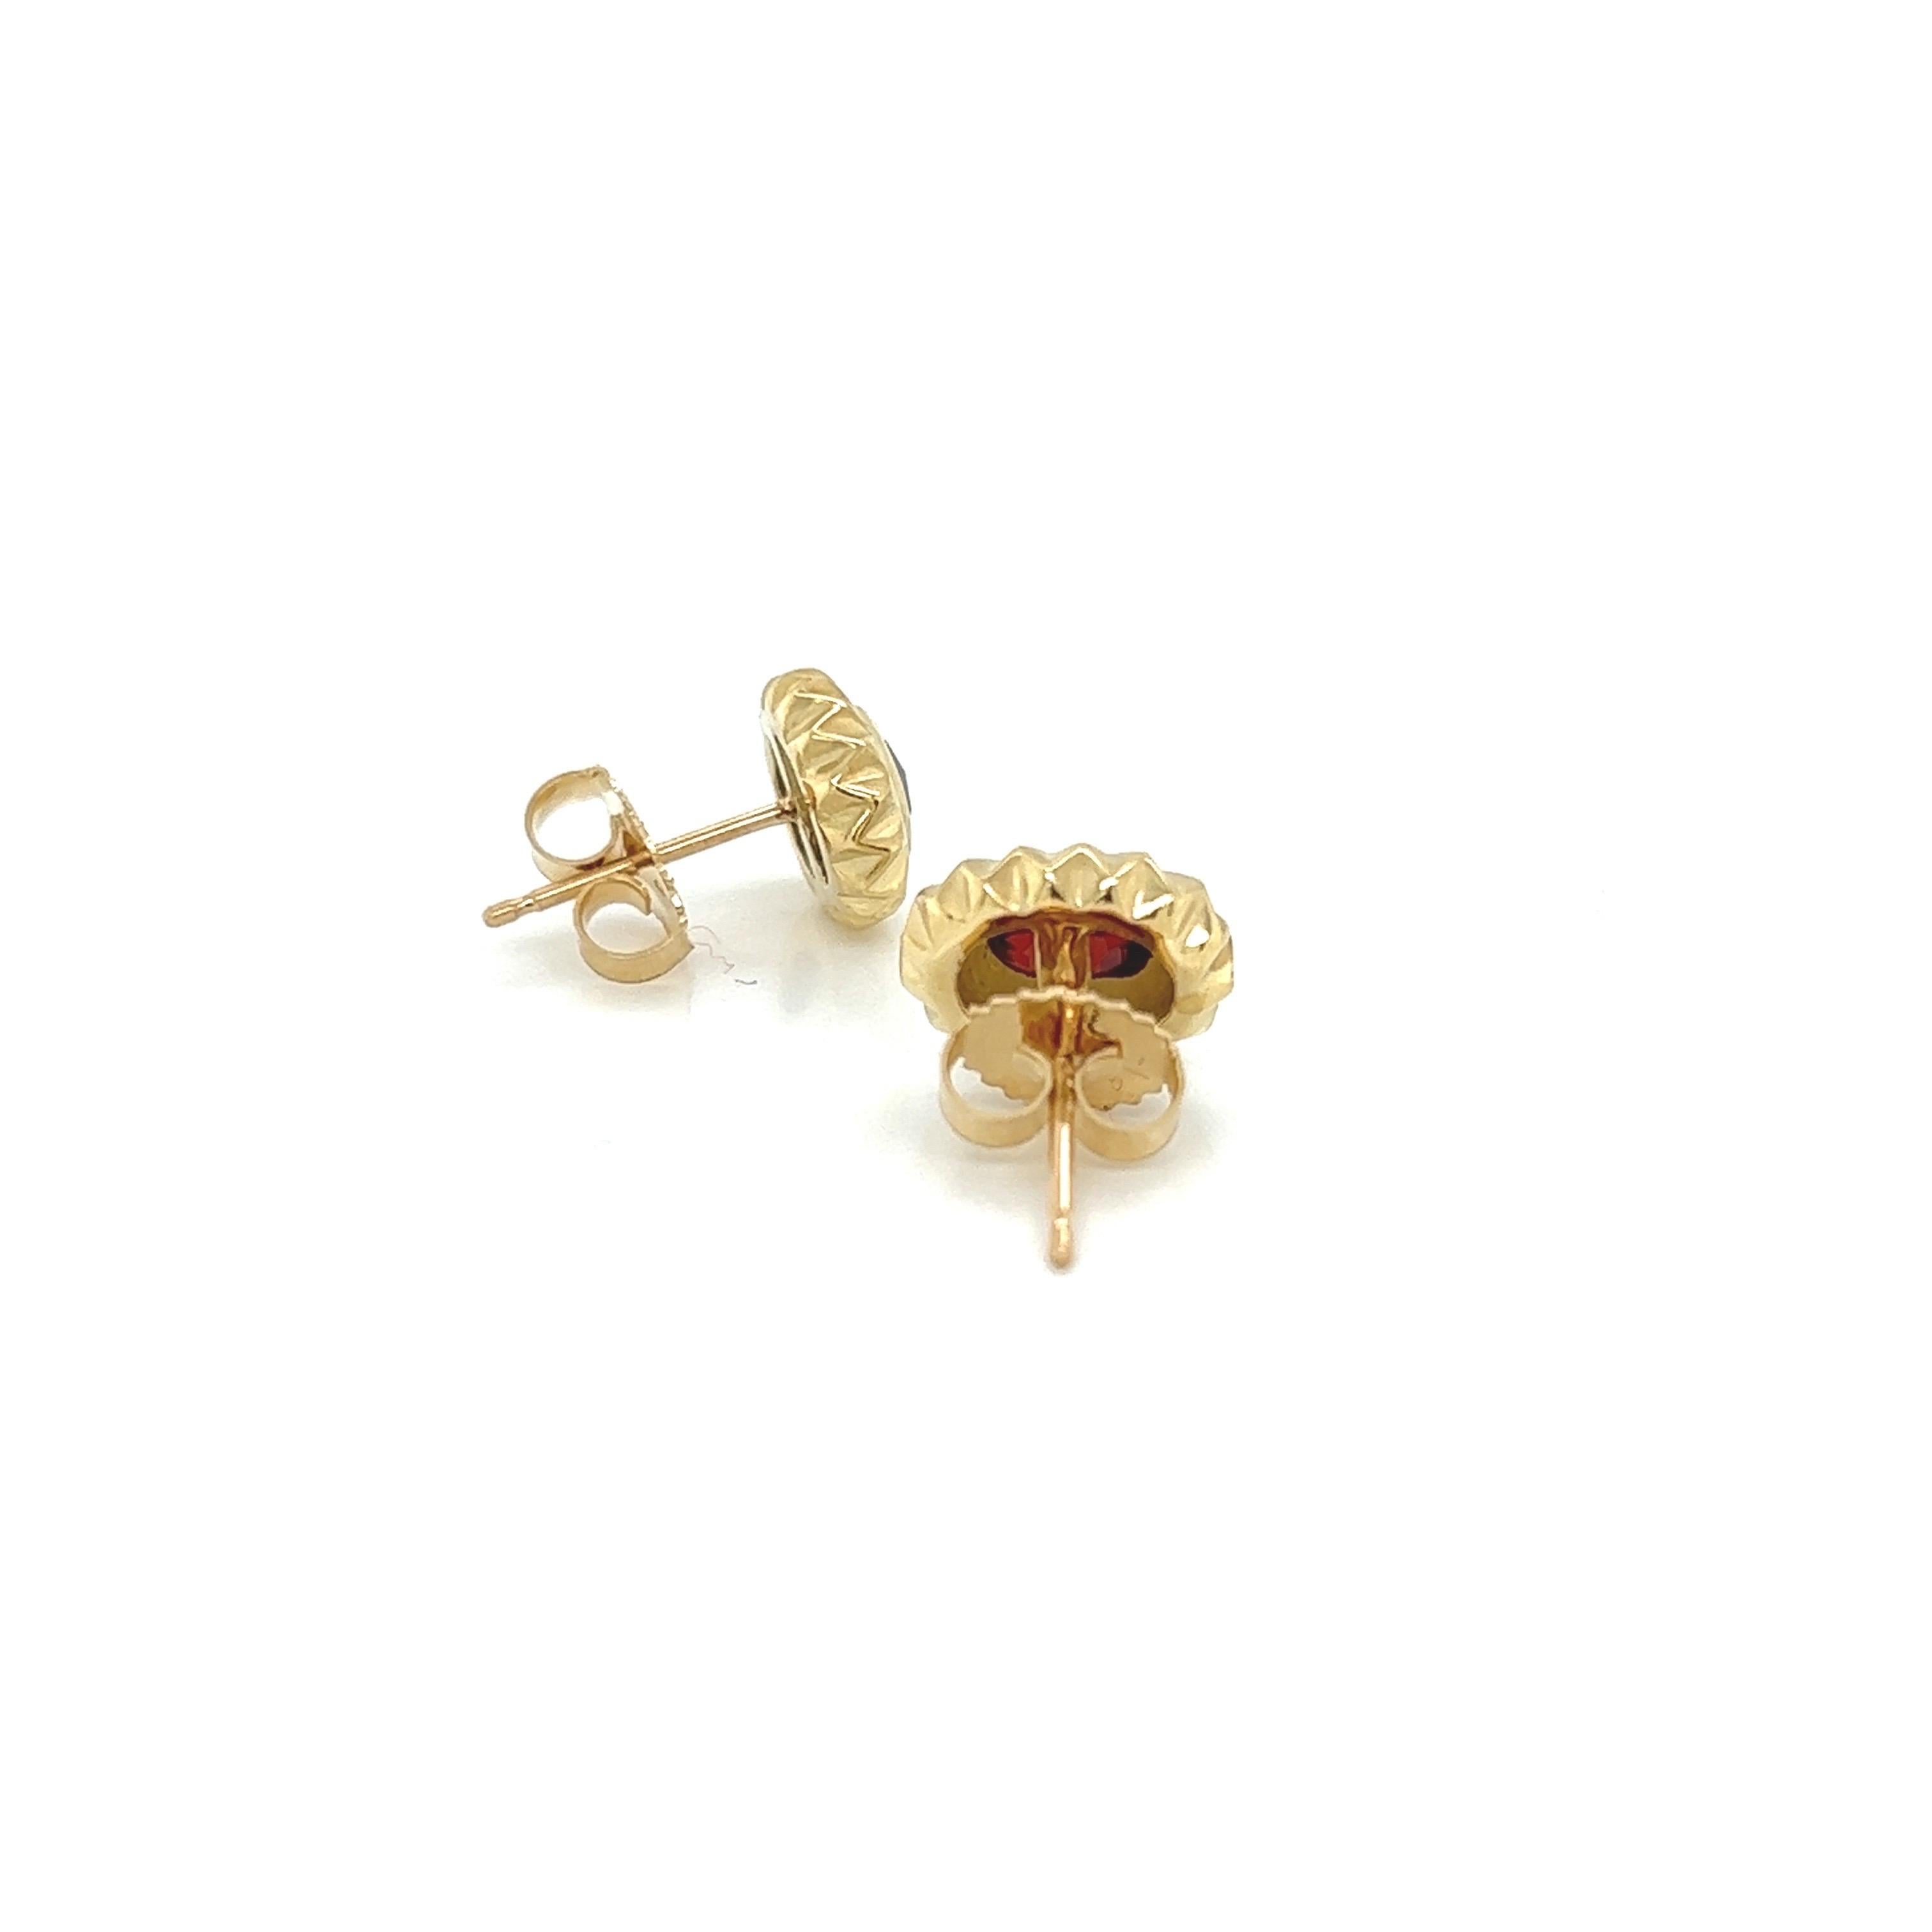 18k Yellow Gold Spiked Stud Earrings with Step Cut Garnet Center.
Comes with 18k gold earring backs.

Approx. measurement 10.40mm x 9mm 